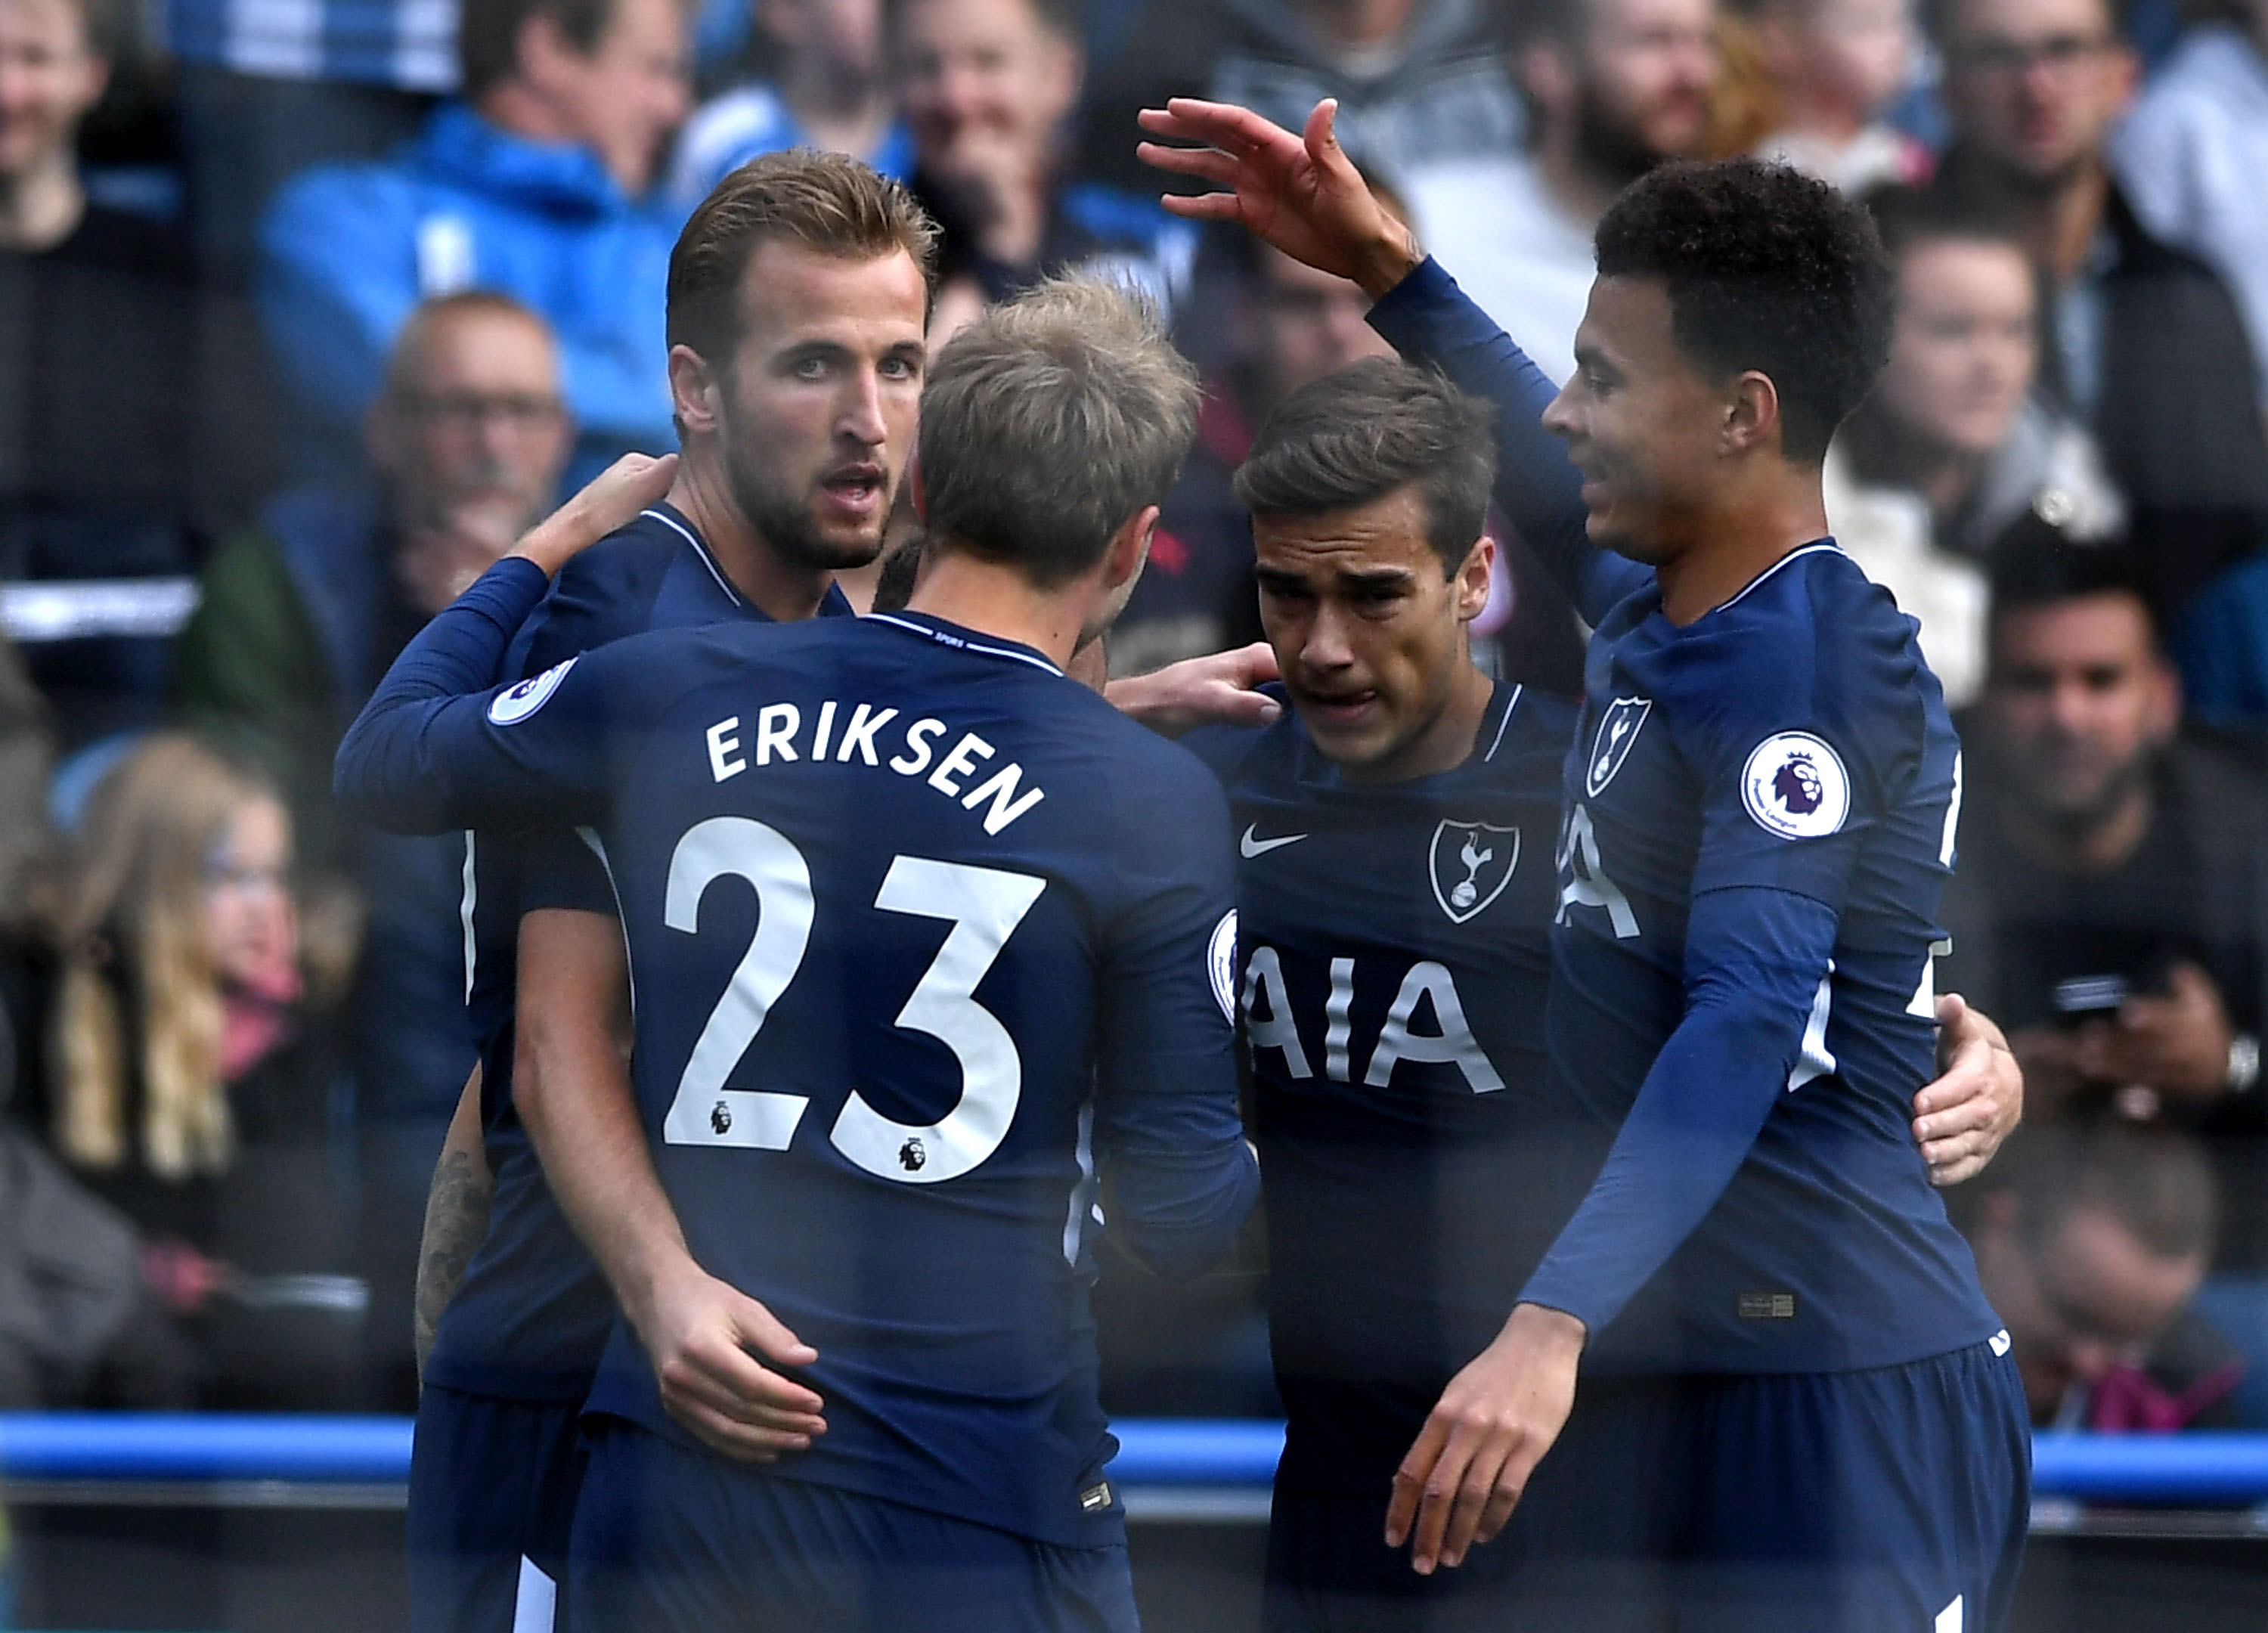 HUDDERSFIELD, ENGLAND - SEPTEMBER 30:  Harry Kane of Tottenham Hotspur celebrates scoring his sides first goal with his Tottenham Hotspur team mates during the Premier League match between Huddersfield Town and Tottenham Hotspur at John Smith's Stadium on September 30, 2017 in Huddersfield, England.  (Photo by Gareth Copley/Getty Images)